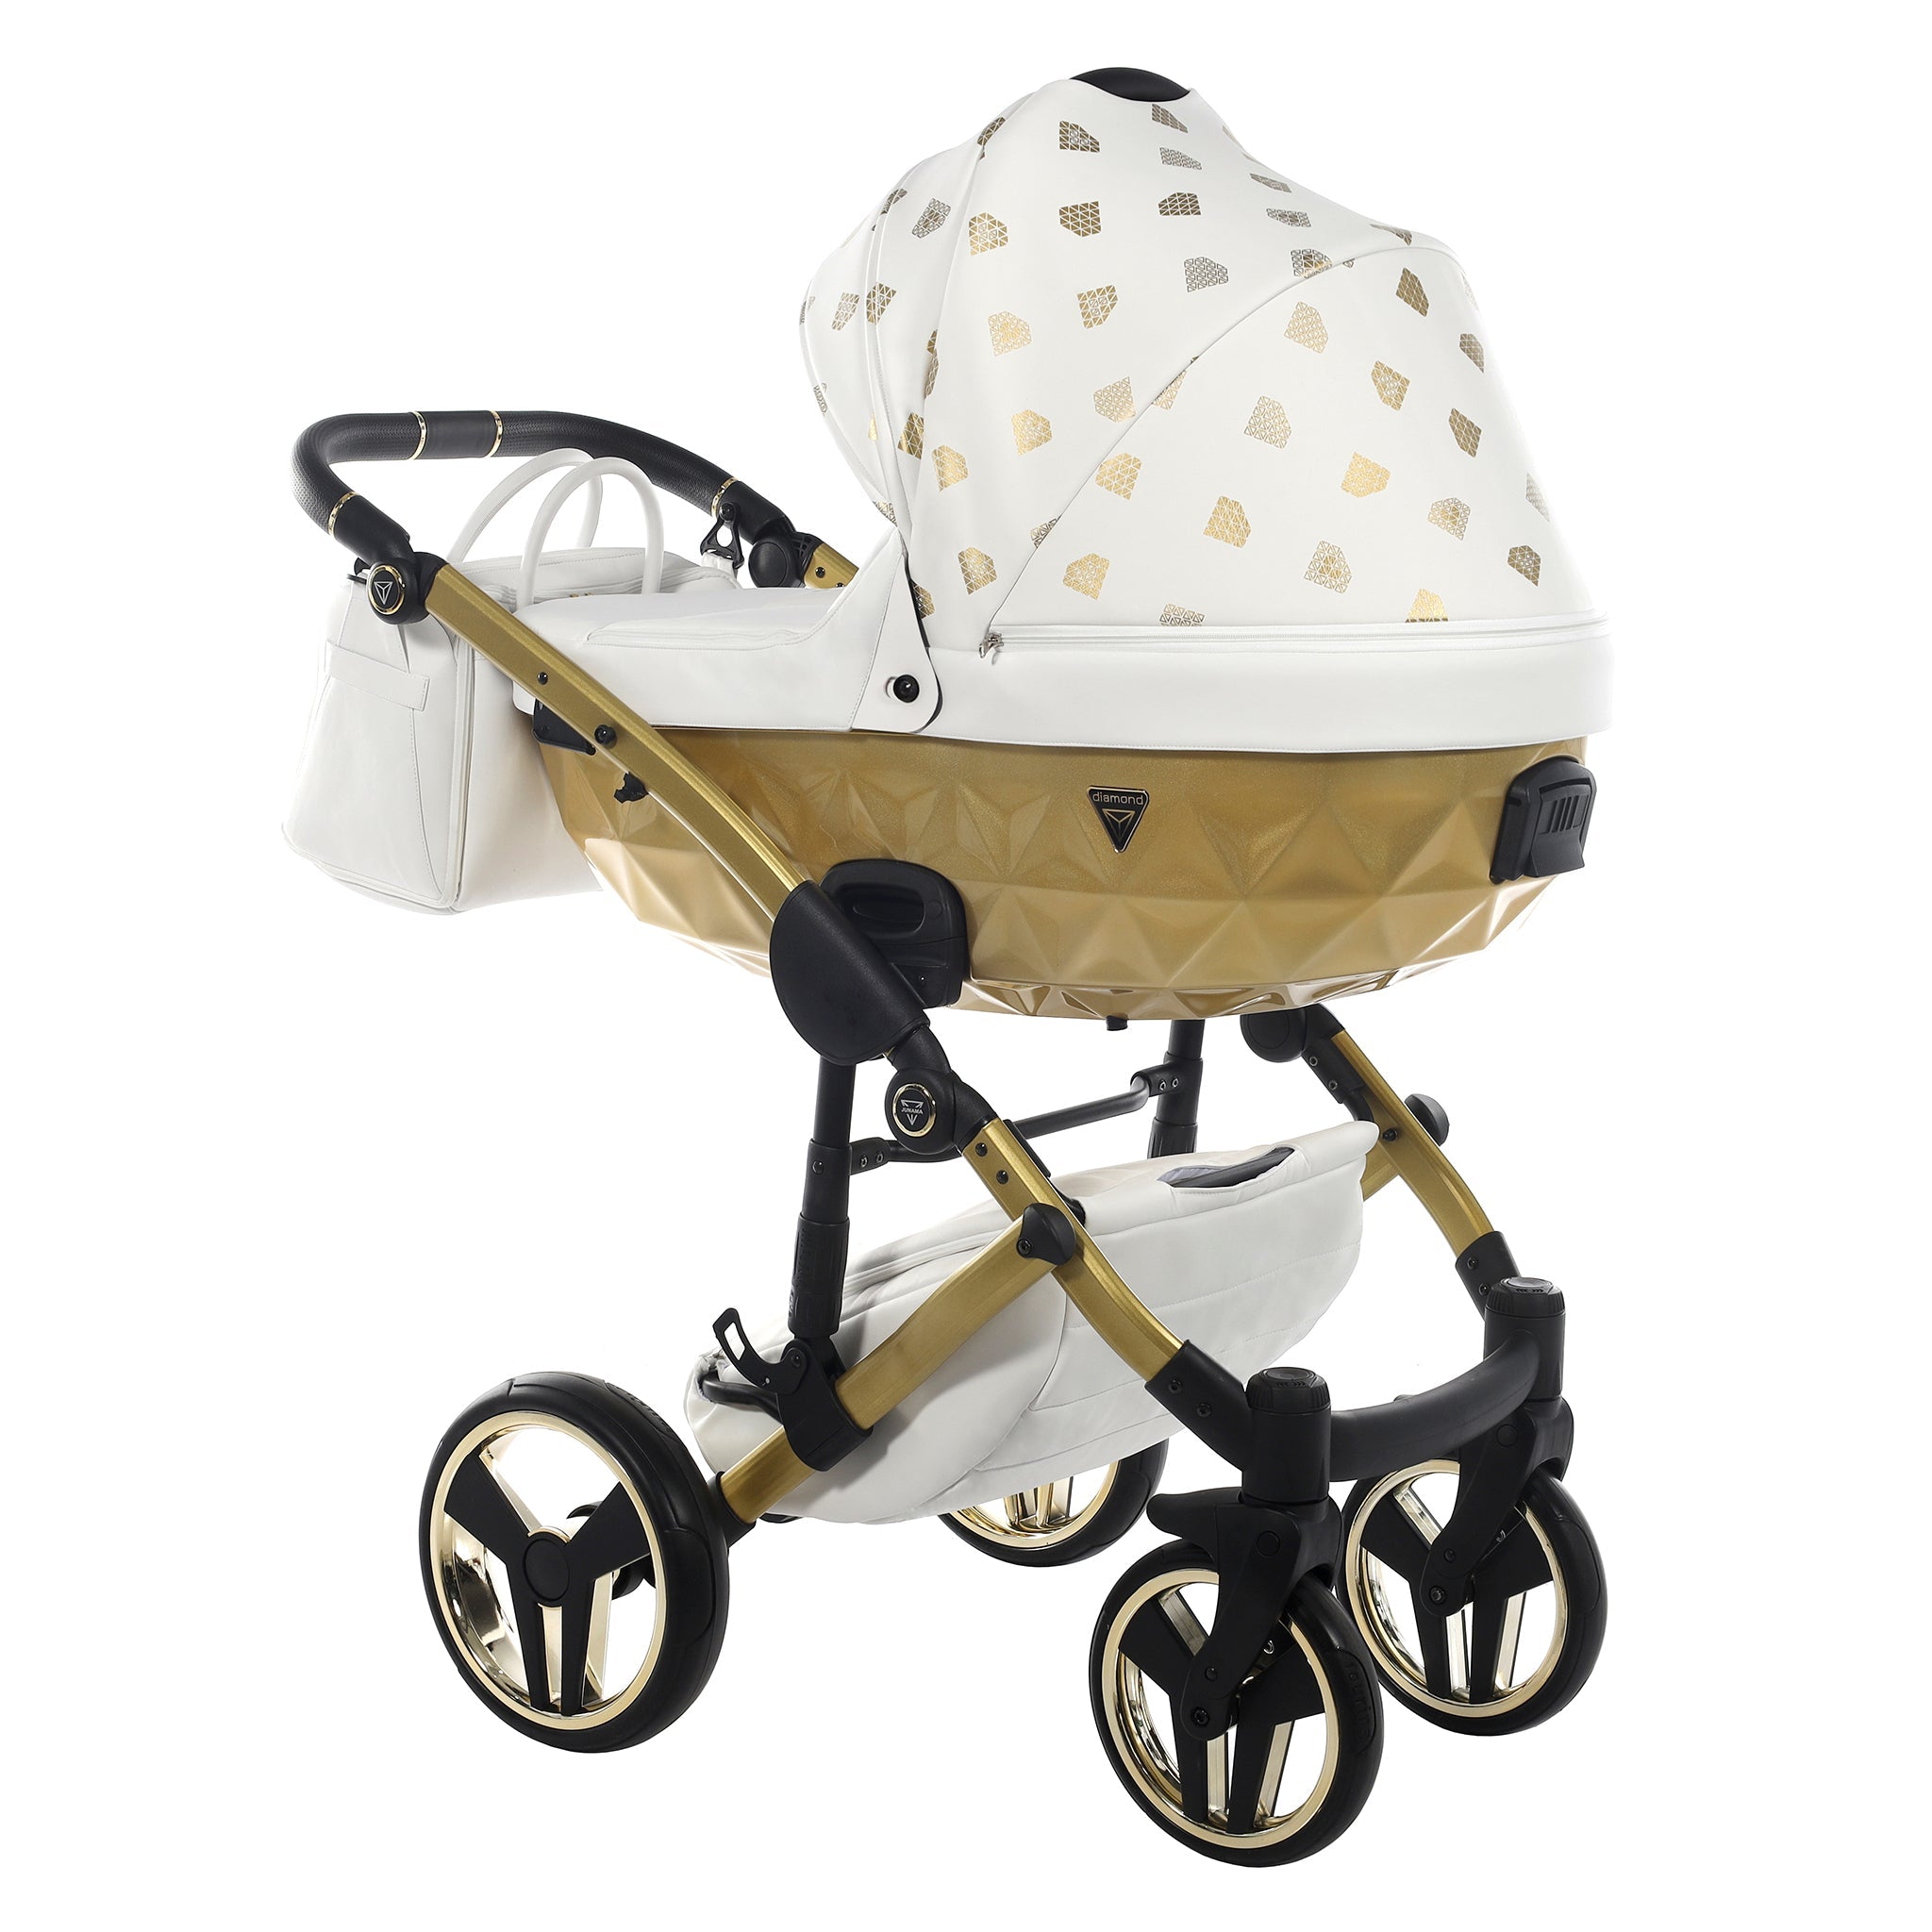 Junama GLOW, baby prams or stroller 2 in 1 - Gold and White, Code number: JUNGLW02